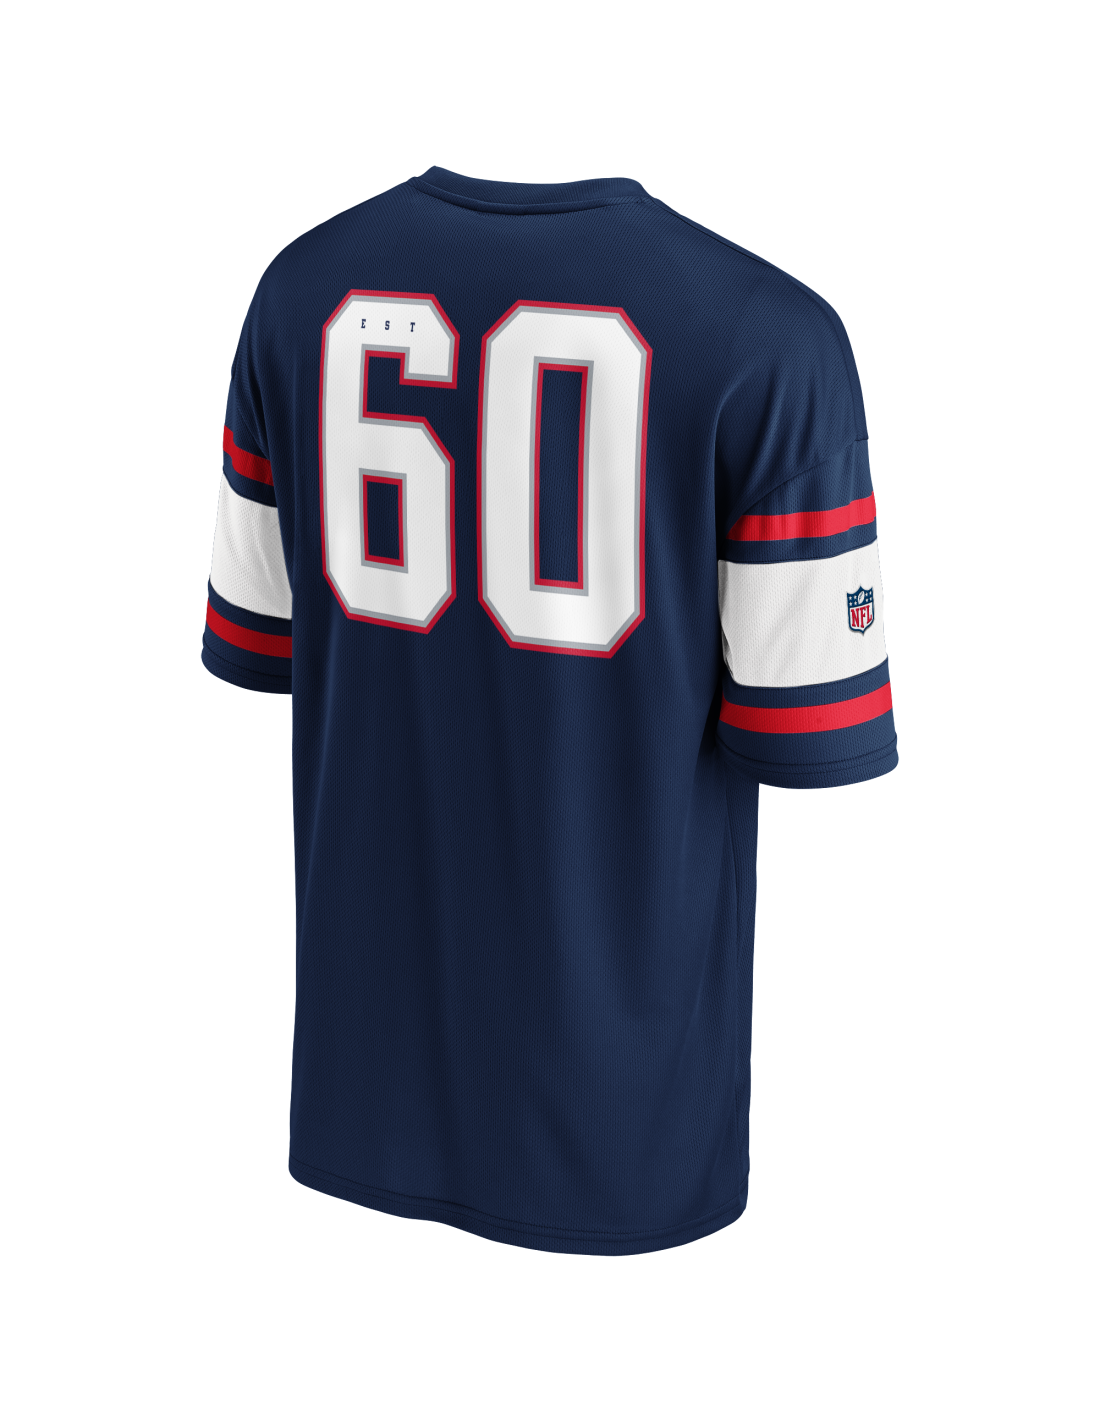 New England Patriots Foundation Supporters Jersey